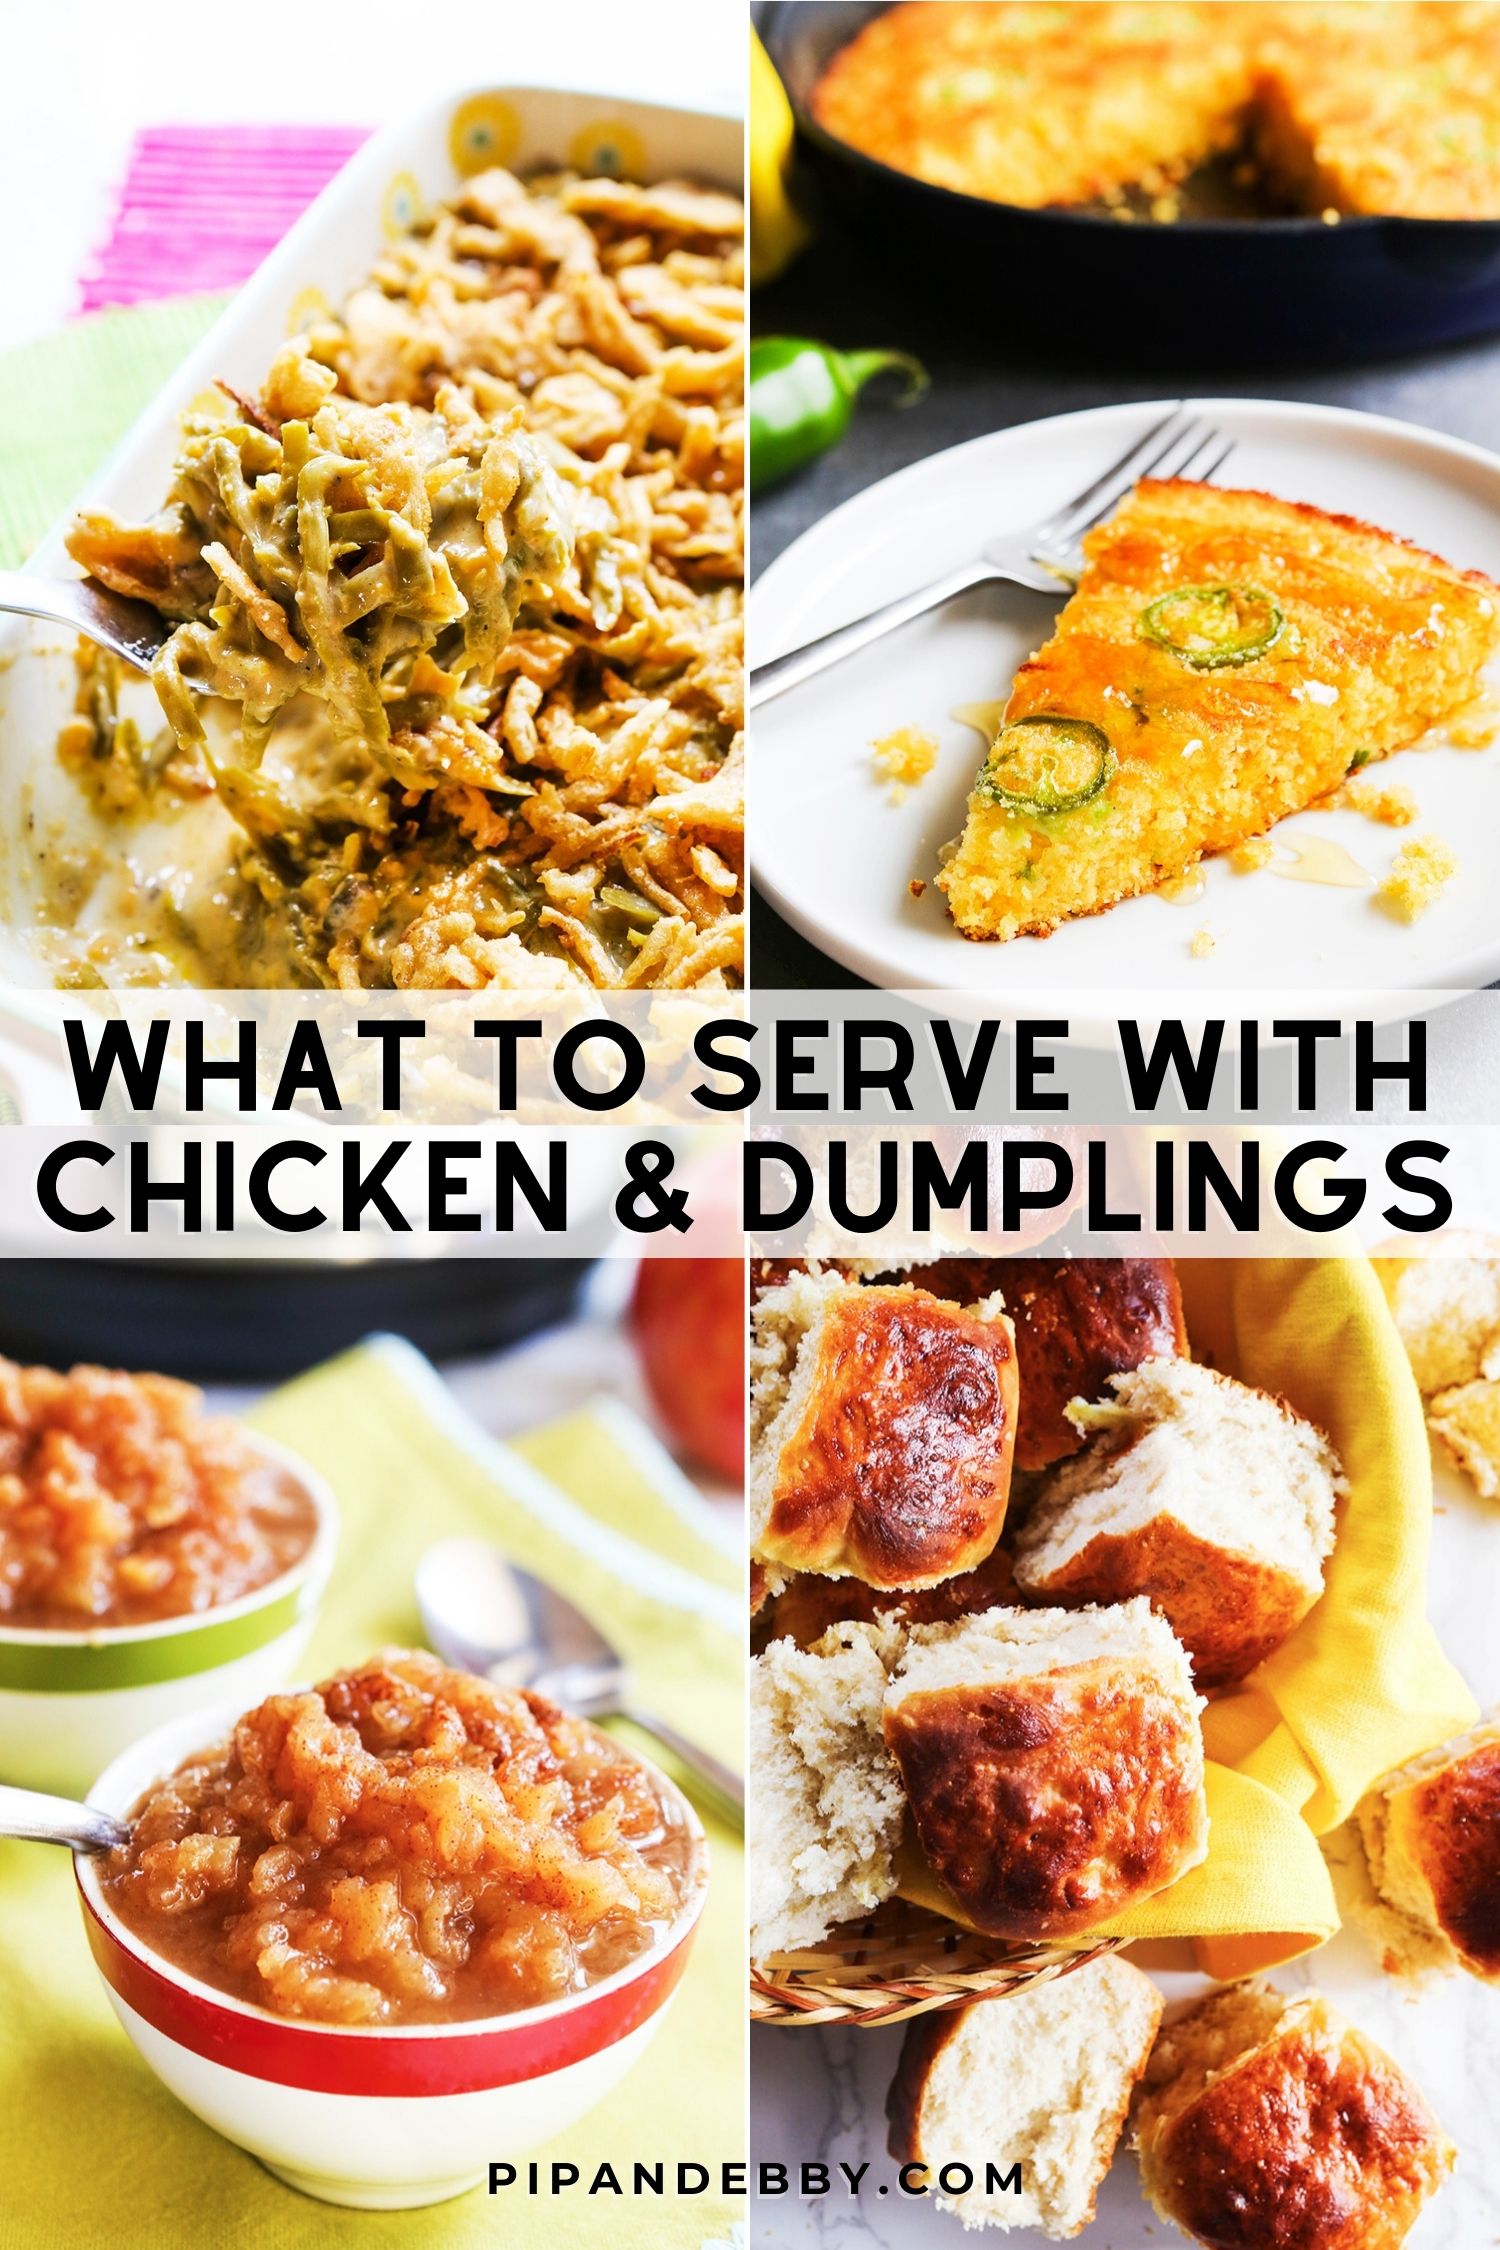 Four food photos in a grid with text overlay reading, "What to serve with chicken and dumplings."